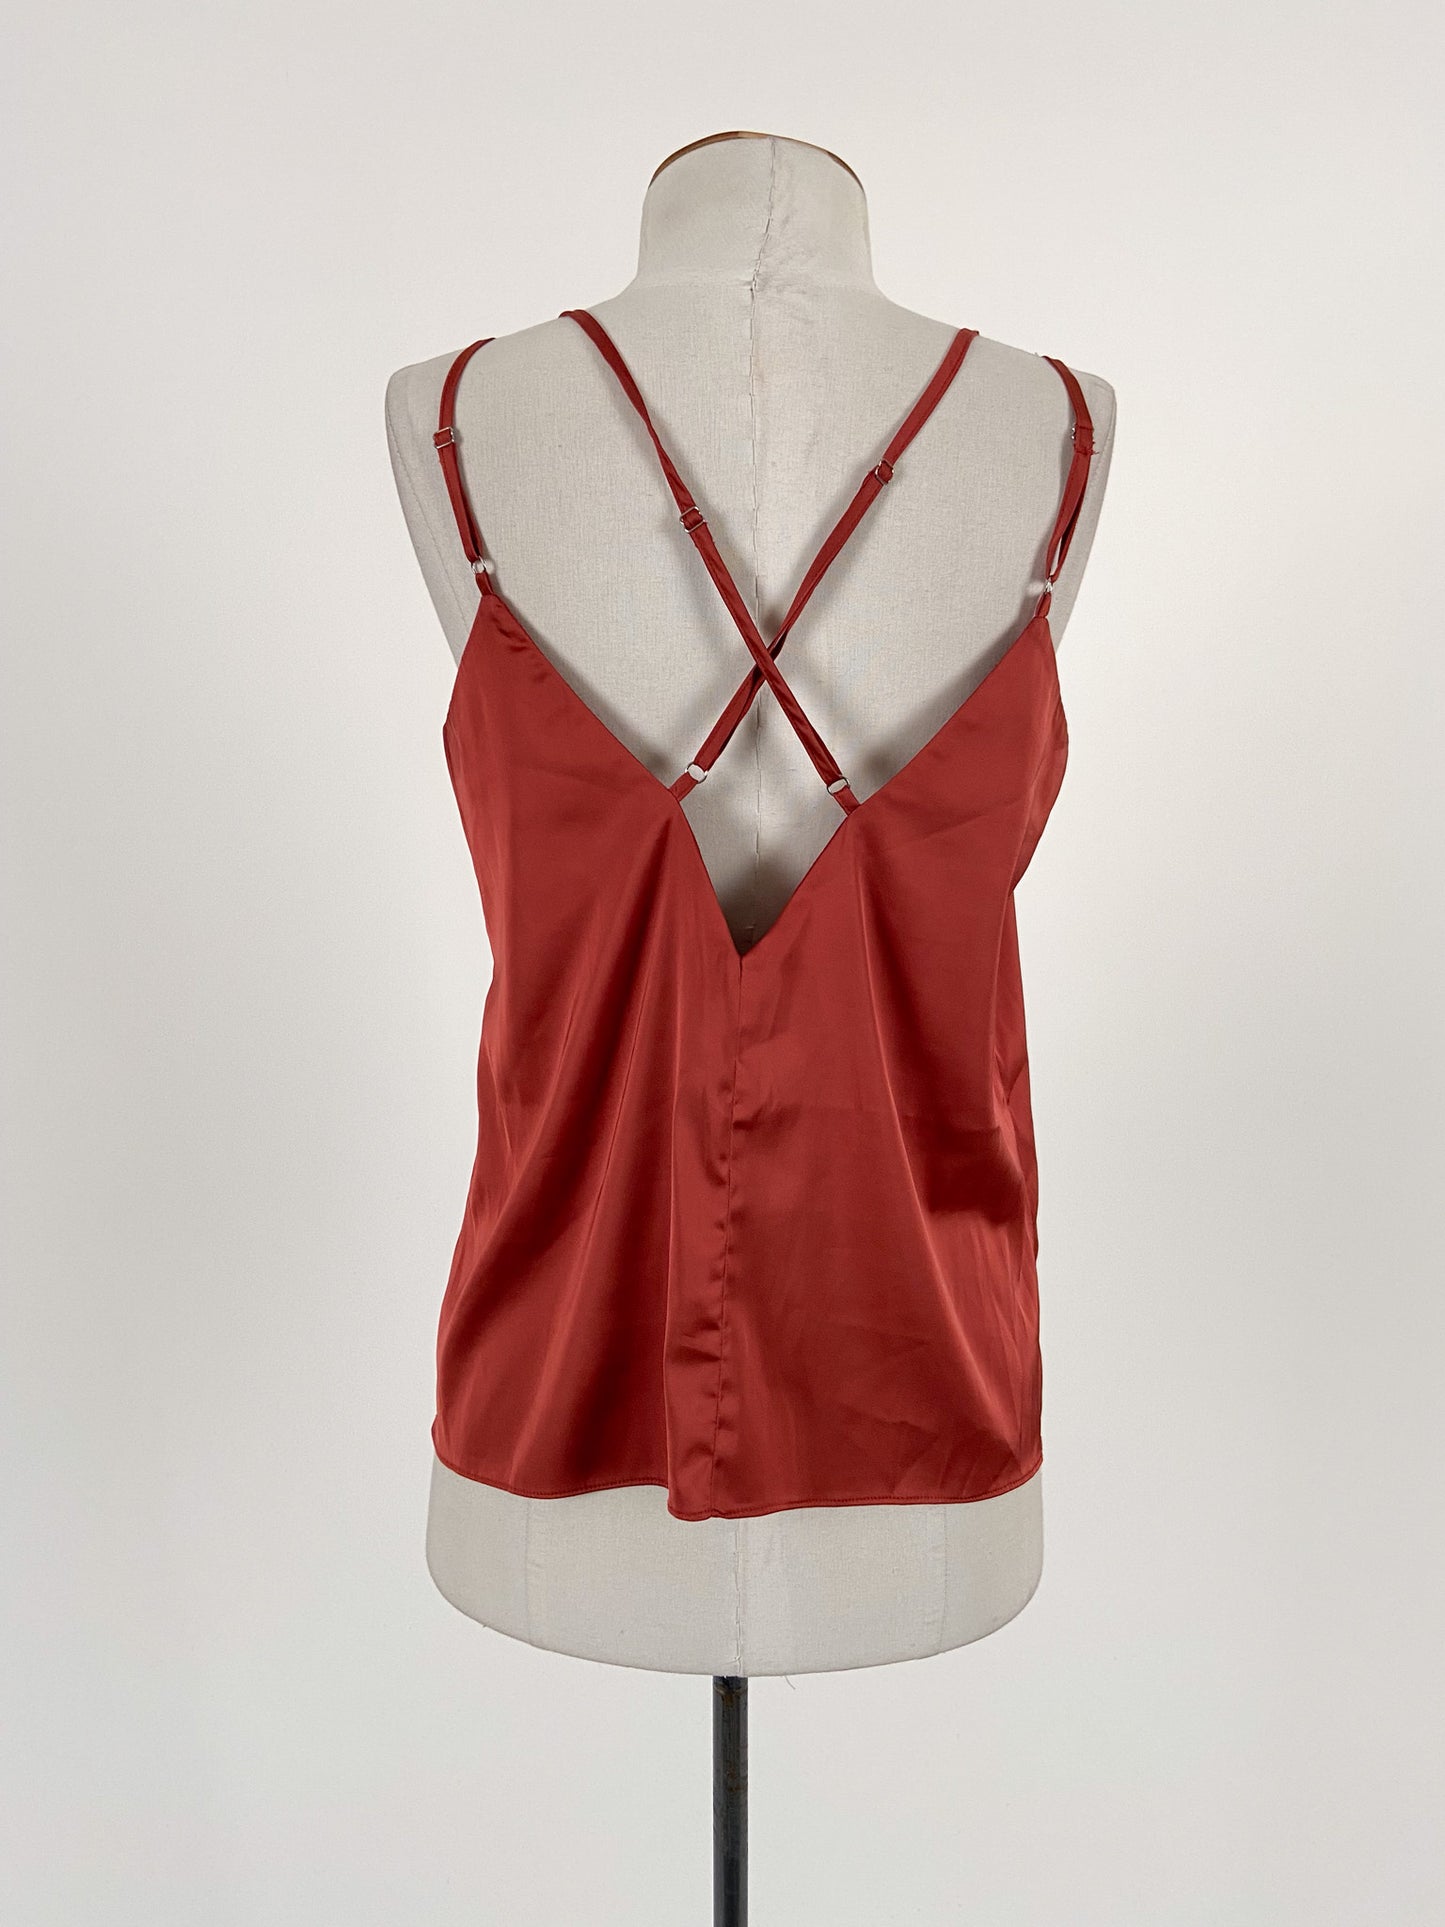 AndCo | Red Casual/Cocktail Top | Size S